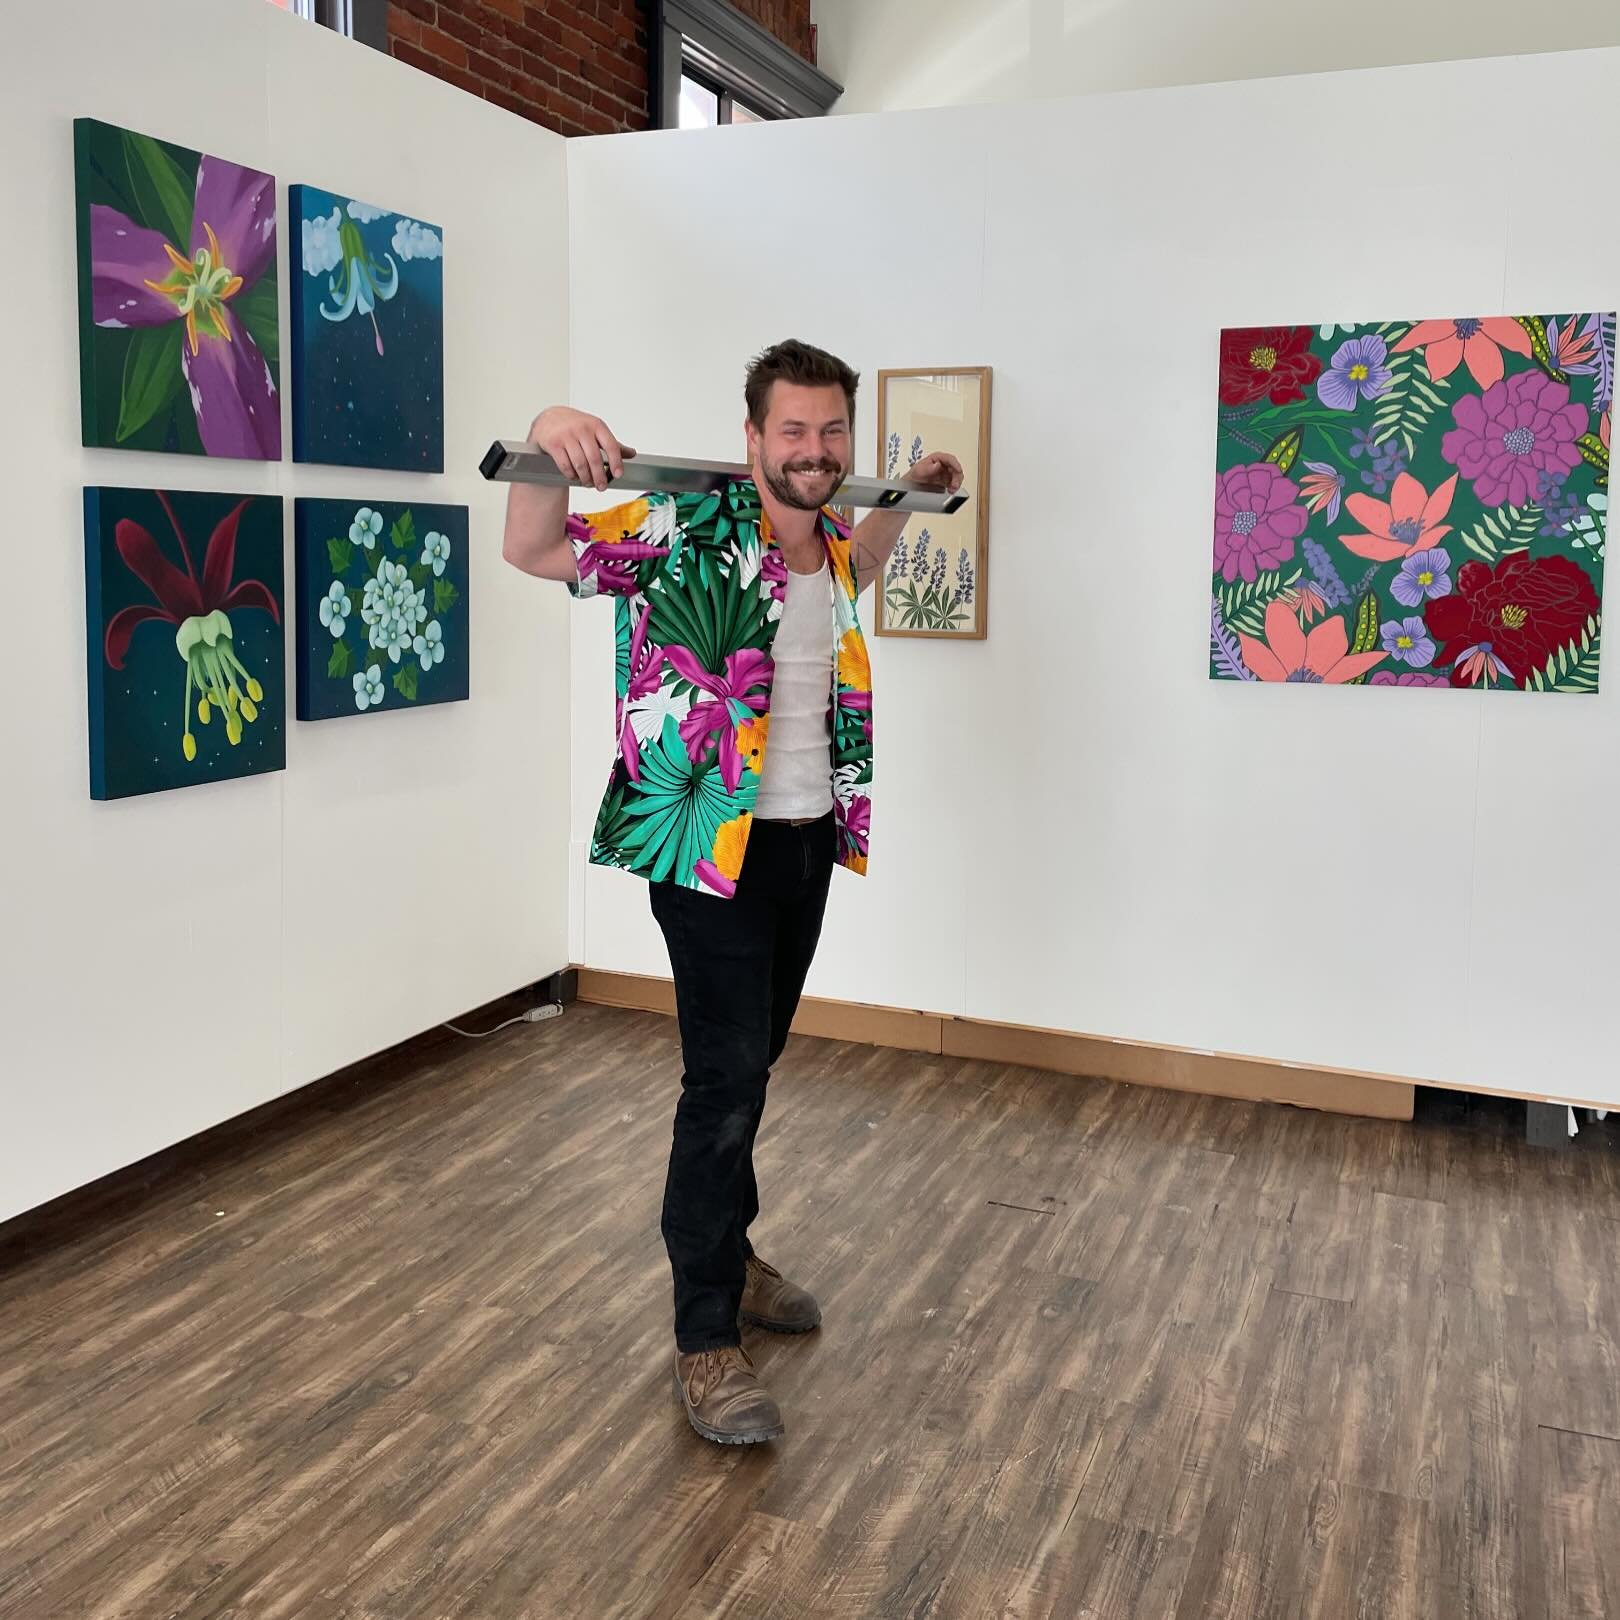 The art cowboy strikes again! Of course with his shirt matching the art. 🌸 Stop by the gallery for the new Art Herbarium exhibit opening during the @belltownartwalk this Friday from 6-9pm! A group exhibit curated by @amydaileda 🌟 Thanks for install